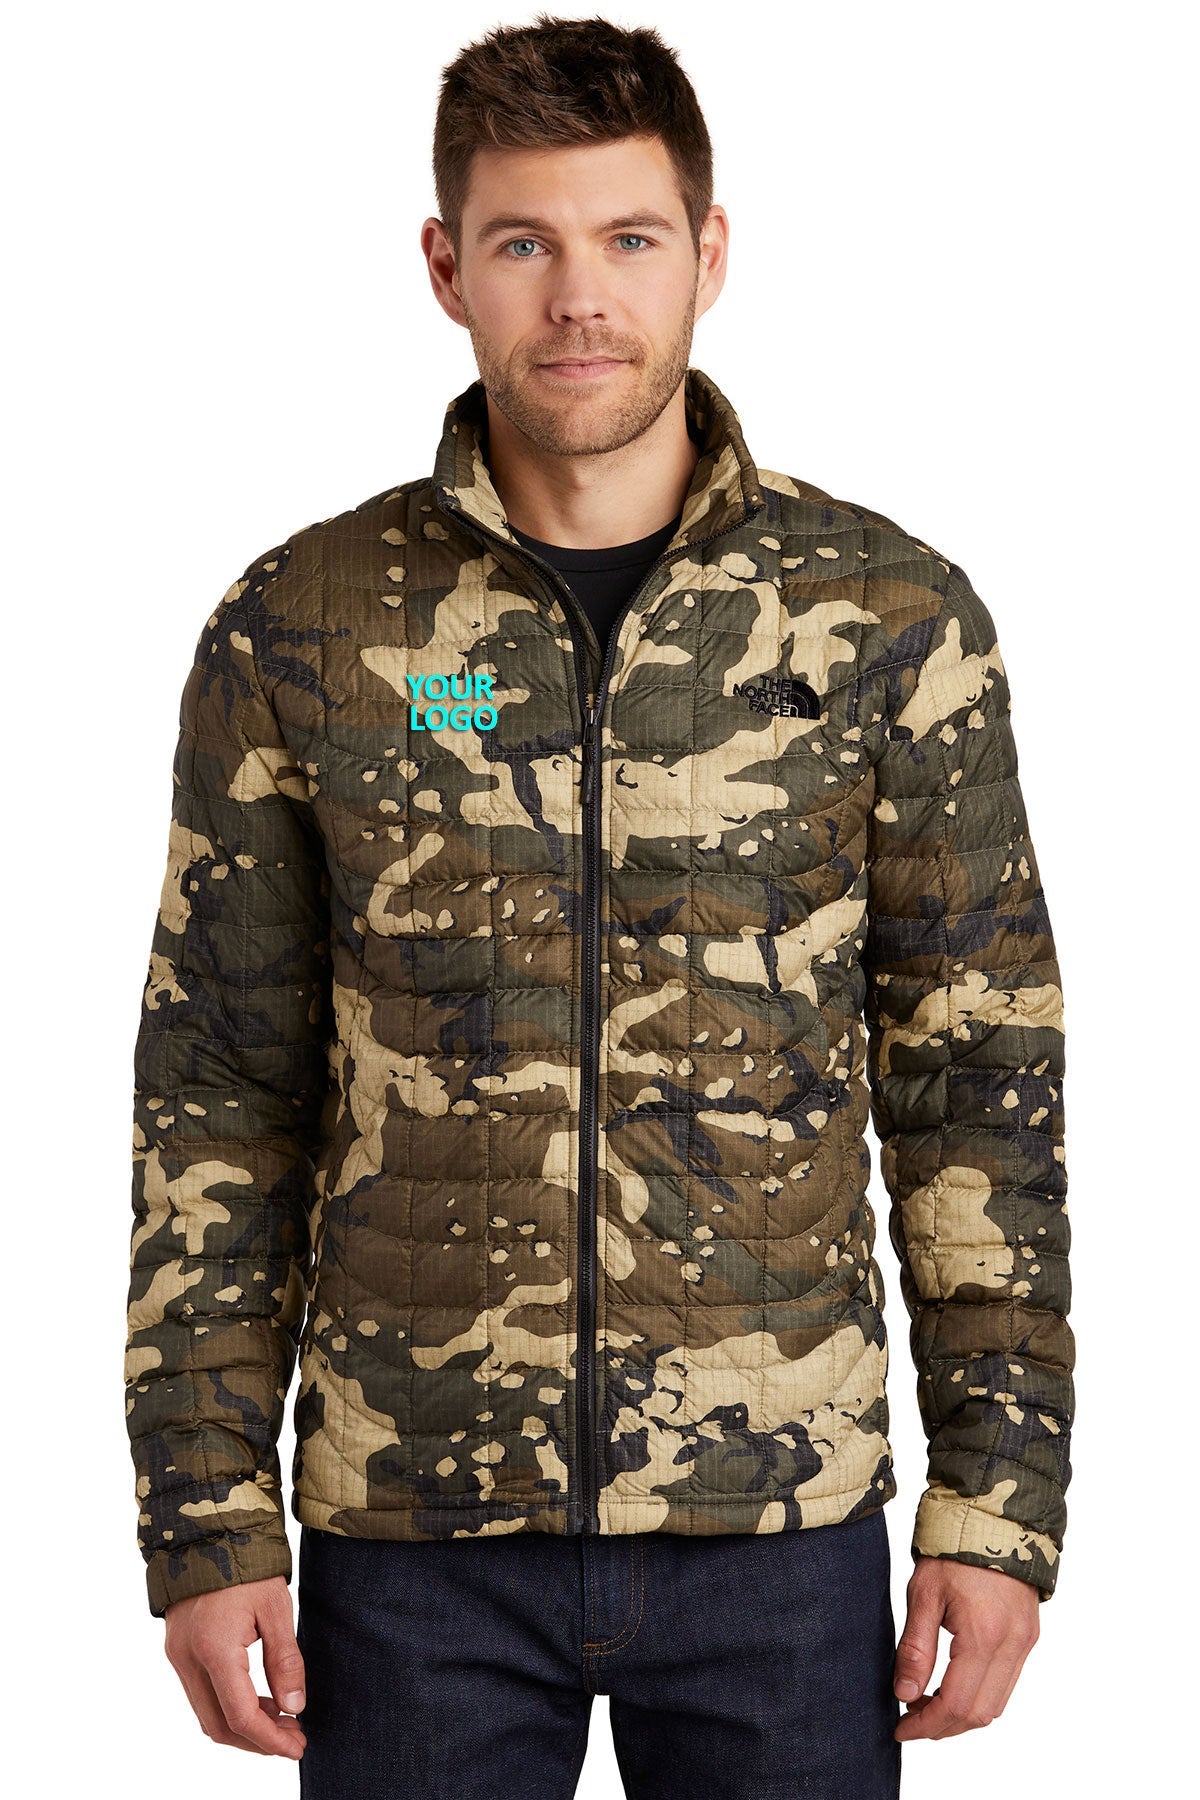 The North Face Burnt Olive Woodchip Camo Print NF0A3LH2 jackets with company logo